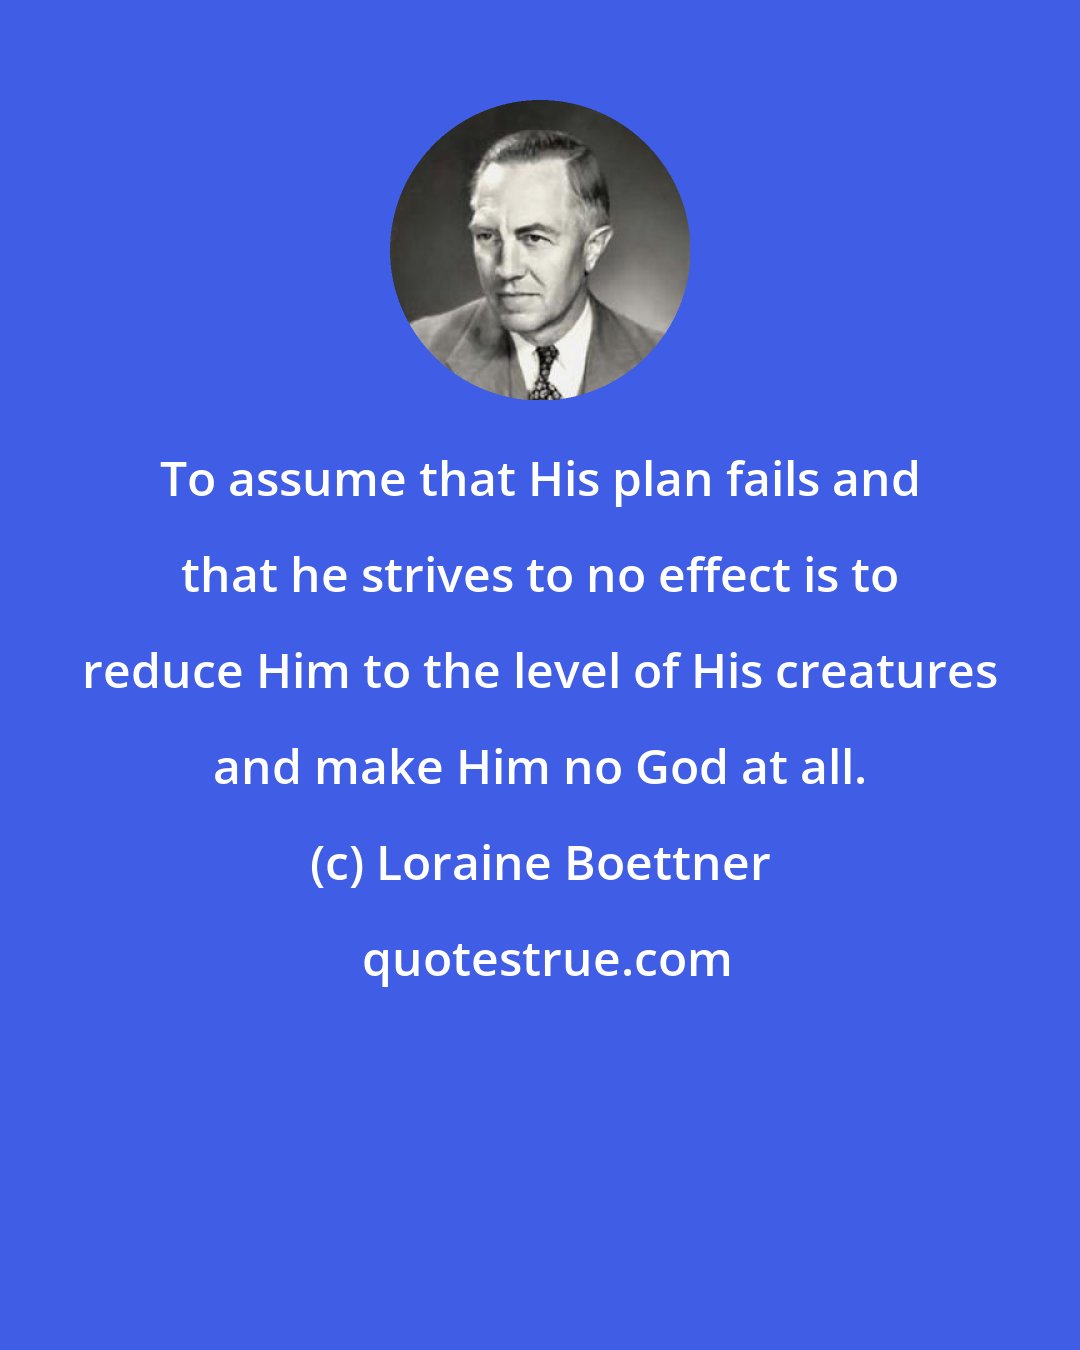 Loraine Boettner: To assume that His plan fails and that he strives to no effect is to reduce Him to the level of His creatures and make Him no God at all.